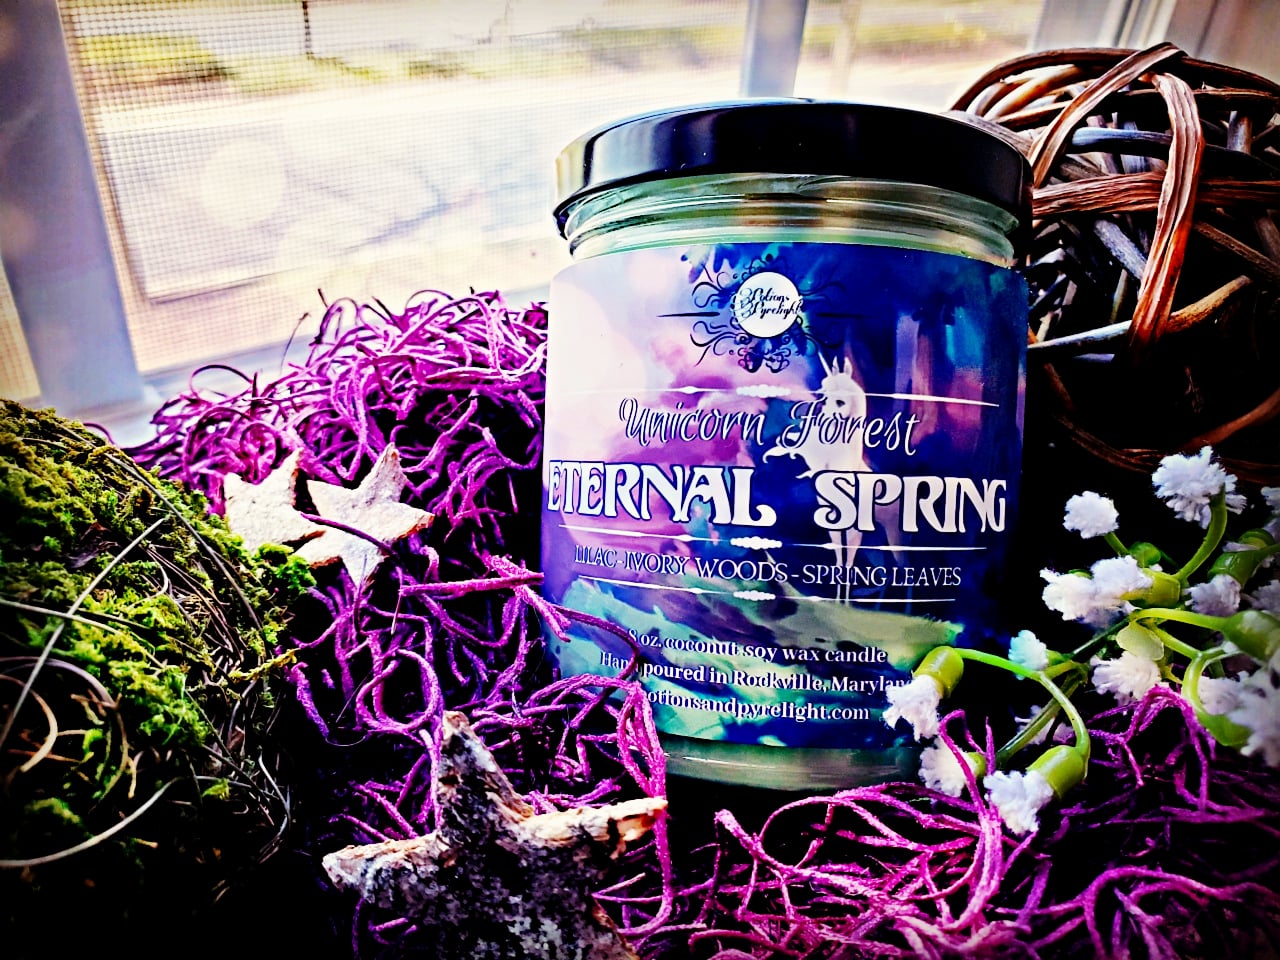 The Last Unicorn - Unicorn Forest: Eternal Spring - Potions & Pyrelight